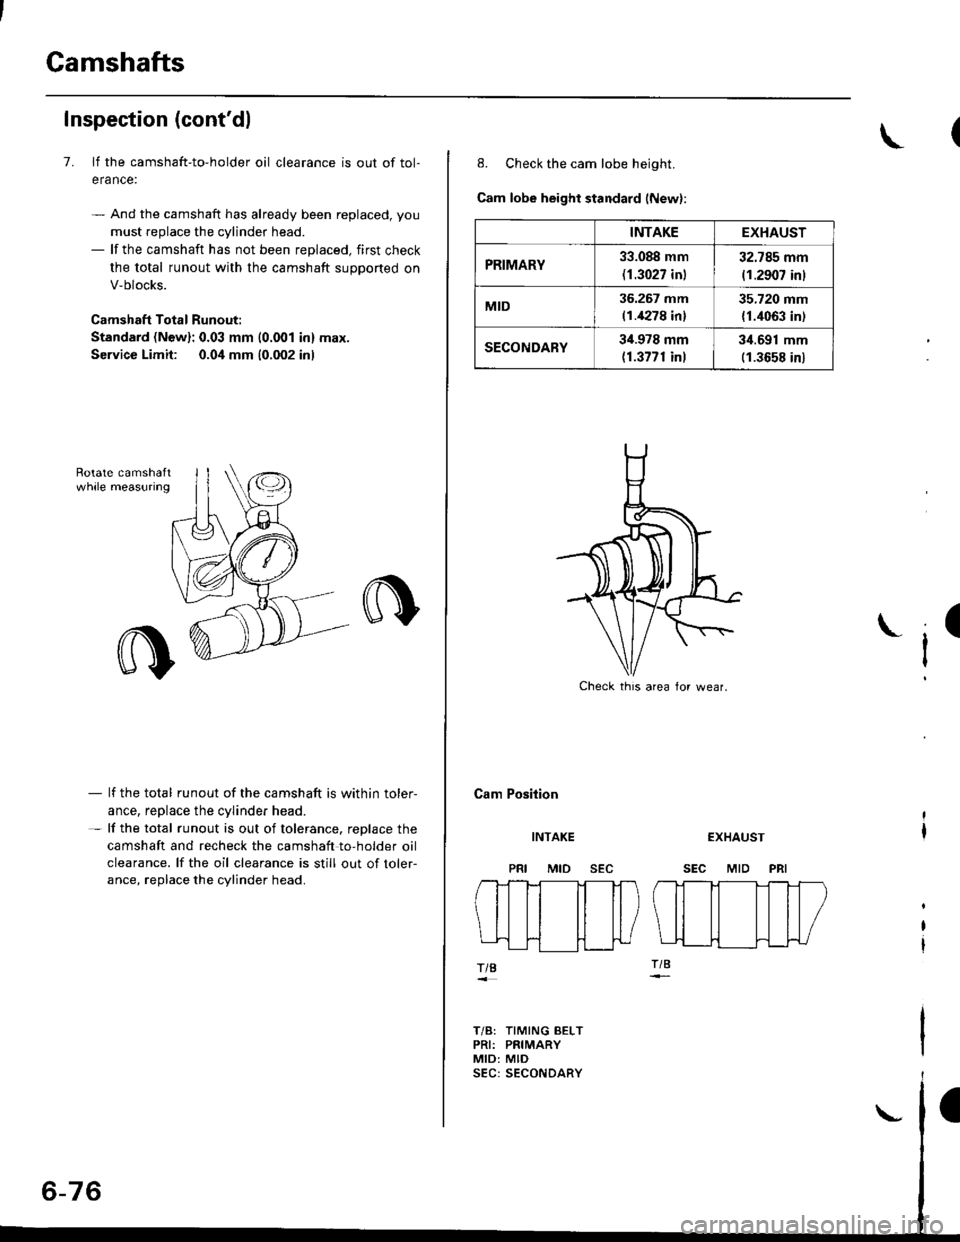 HONDA CIVIC 1996 6.G Owners Manual Gamshafts
Inspection (contdl
7. lf the camshaft-to-holder oil clearance is out of tol-
erance:
- And the camshaft has already been replaced, you
must replace the cylinder head.- lf the camshaft has n